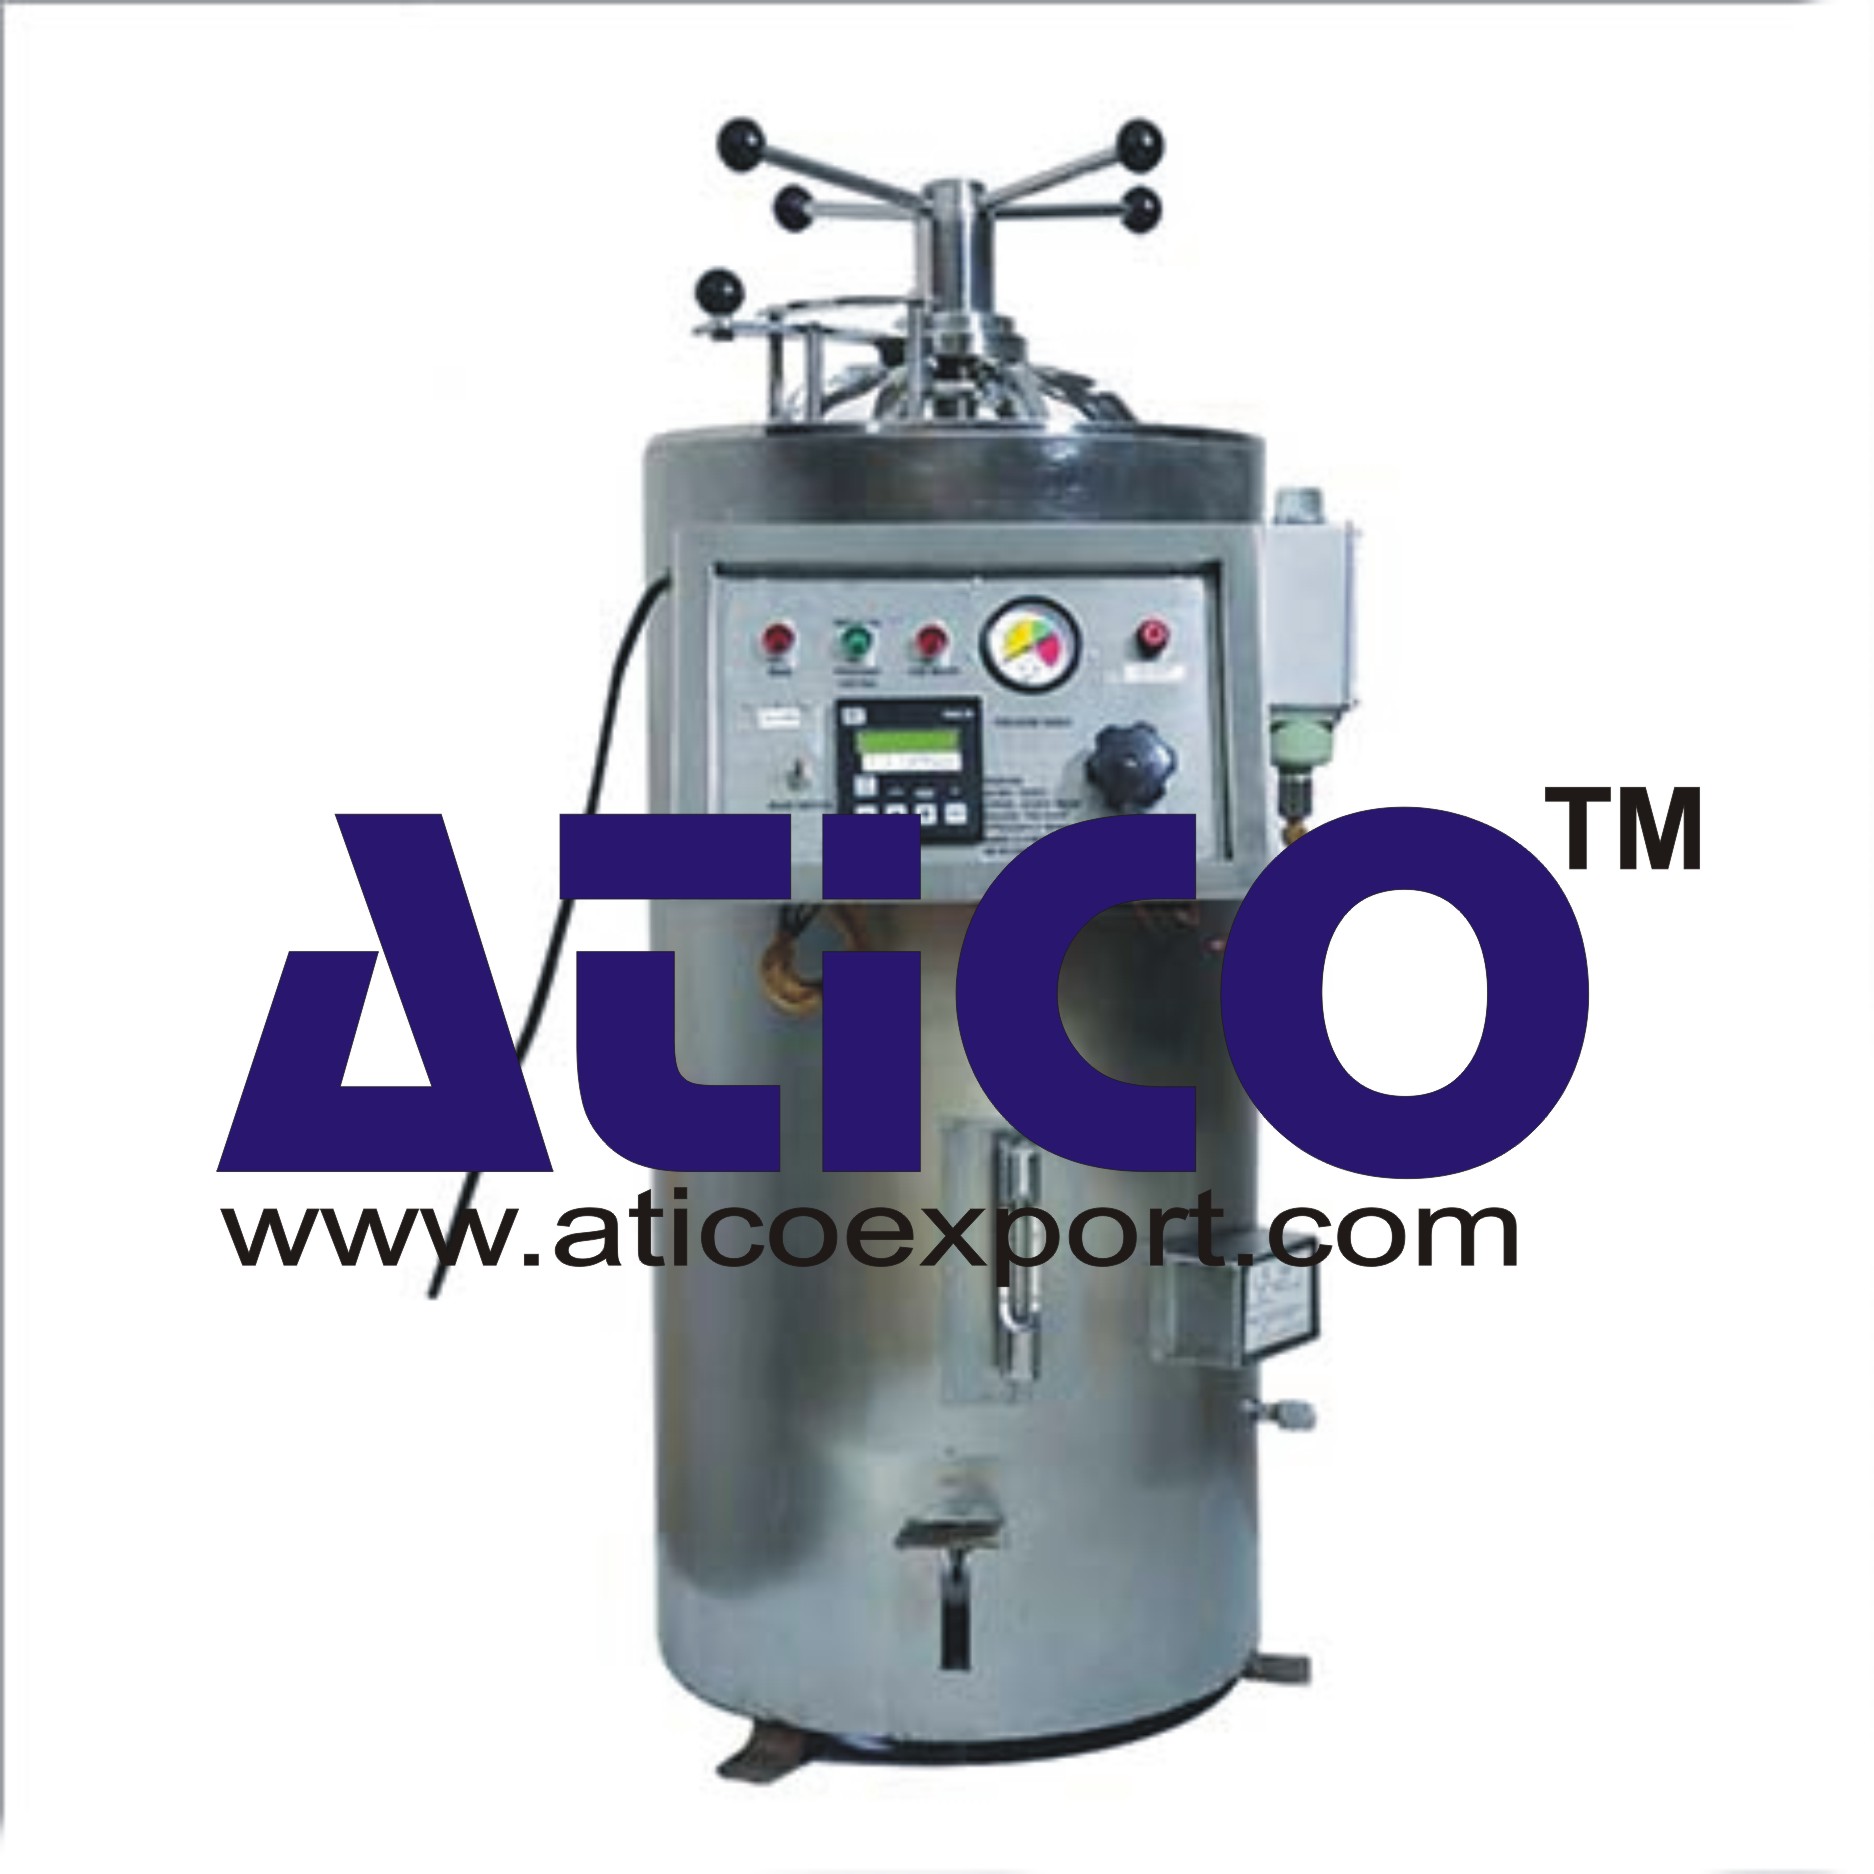 Autoclave Vertical Fully Automatic